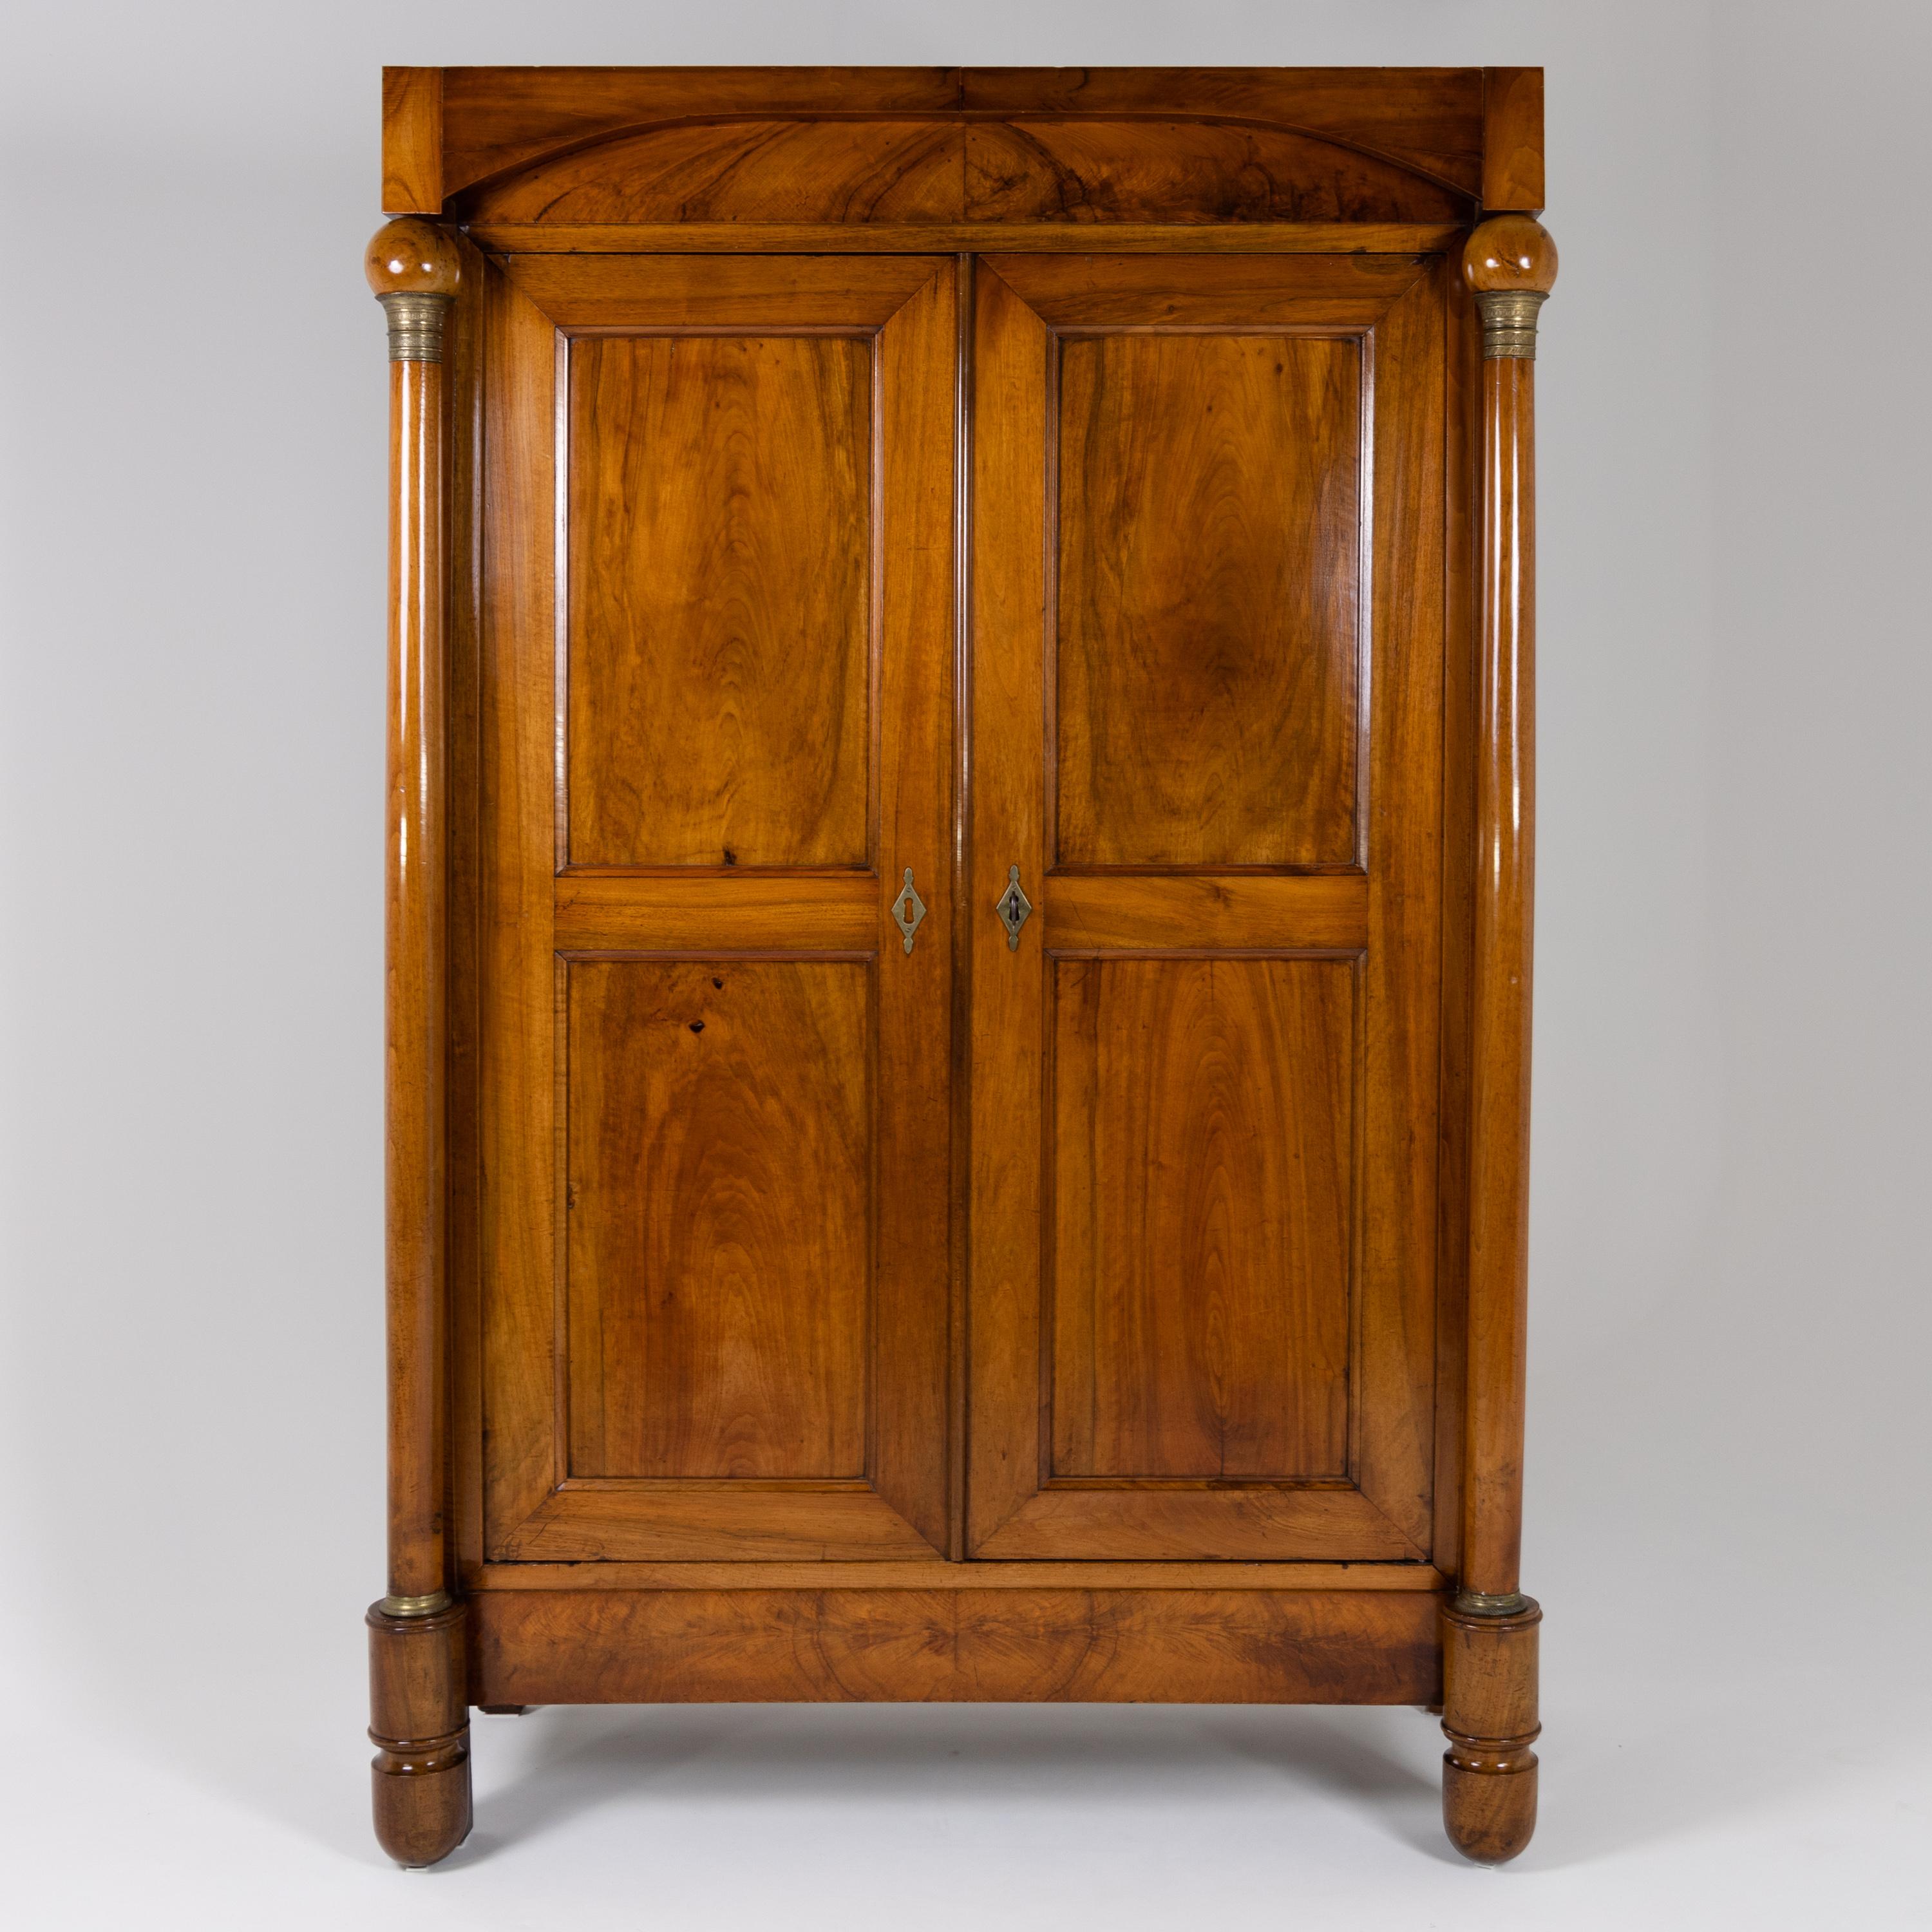 Two-door Italian cabinet with coffered doors and sides and column supports on conical profiled legs with brass capitals and bases. The columns carry sphere finials which support the segmentally cut straight cornice. Solid Mahogany and veneered. The